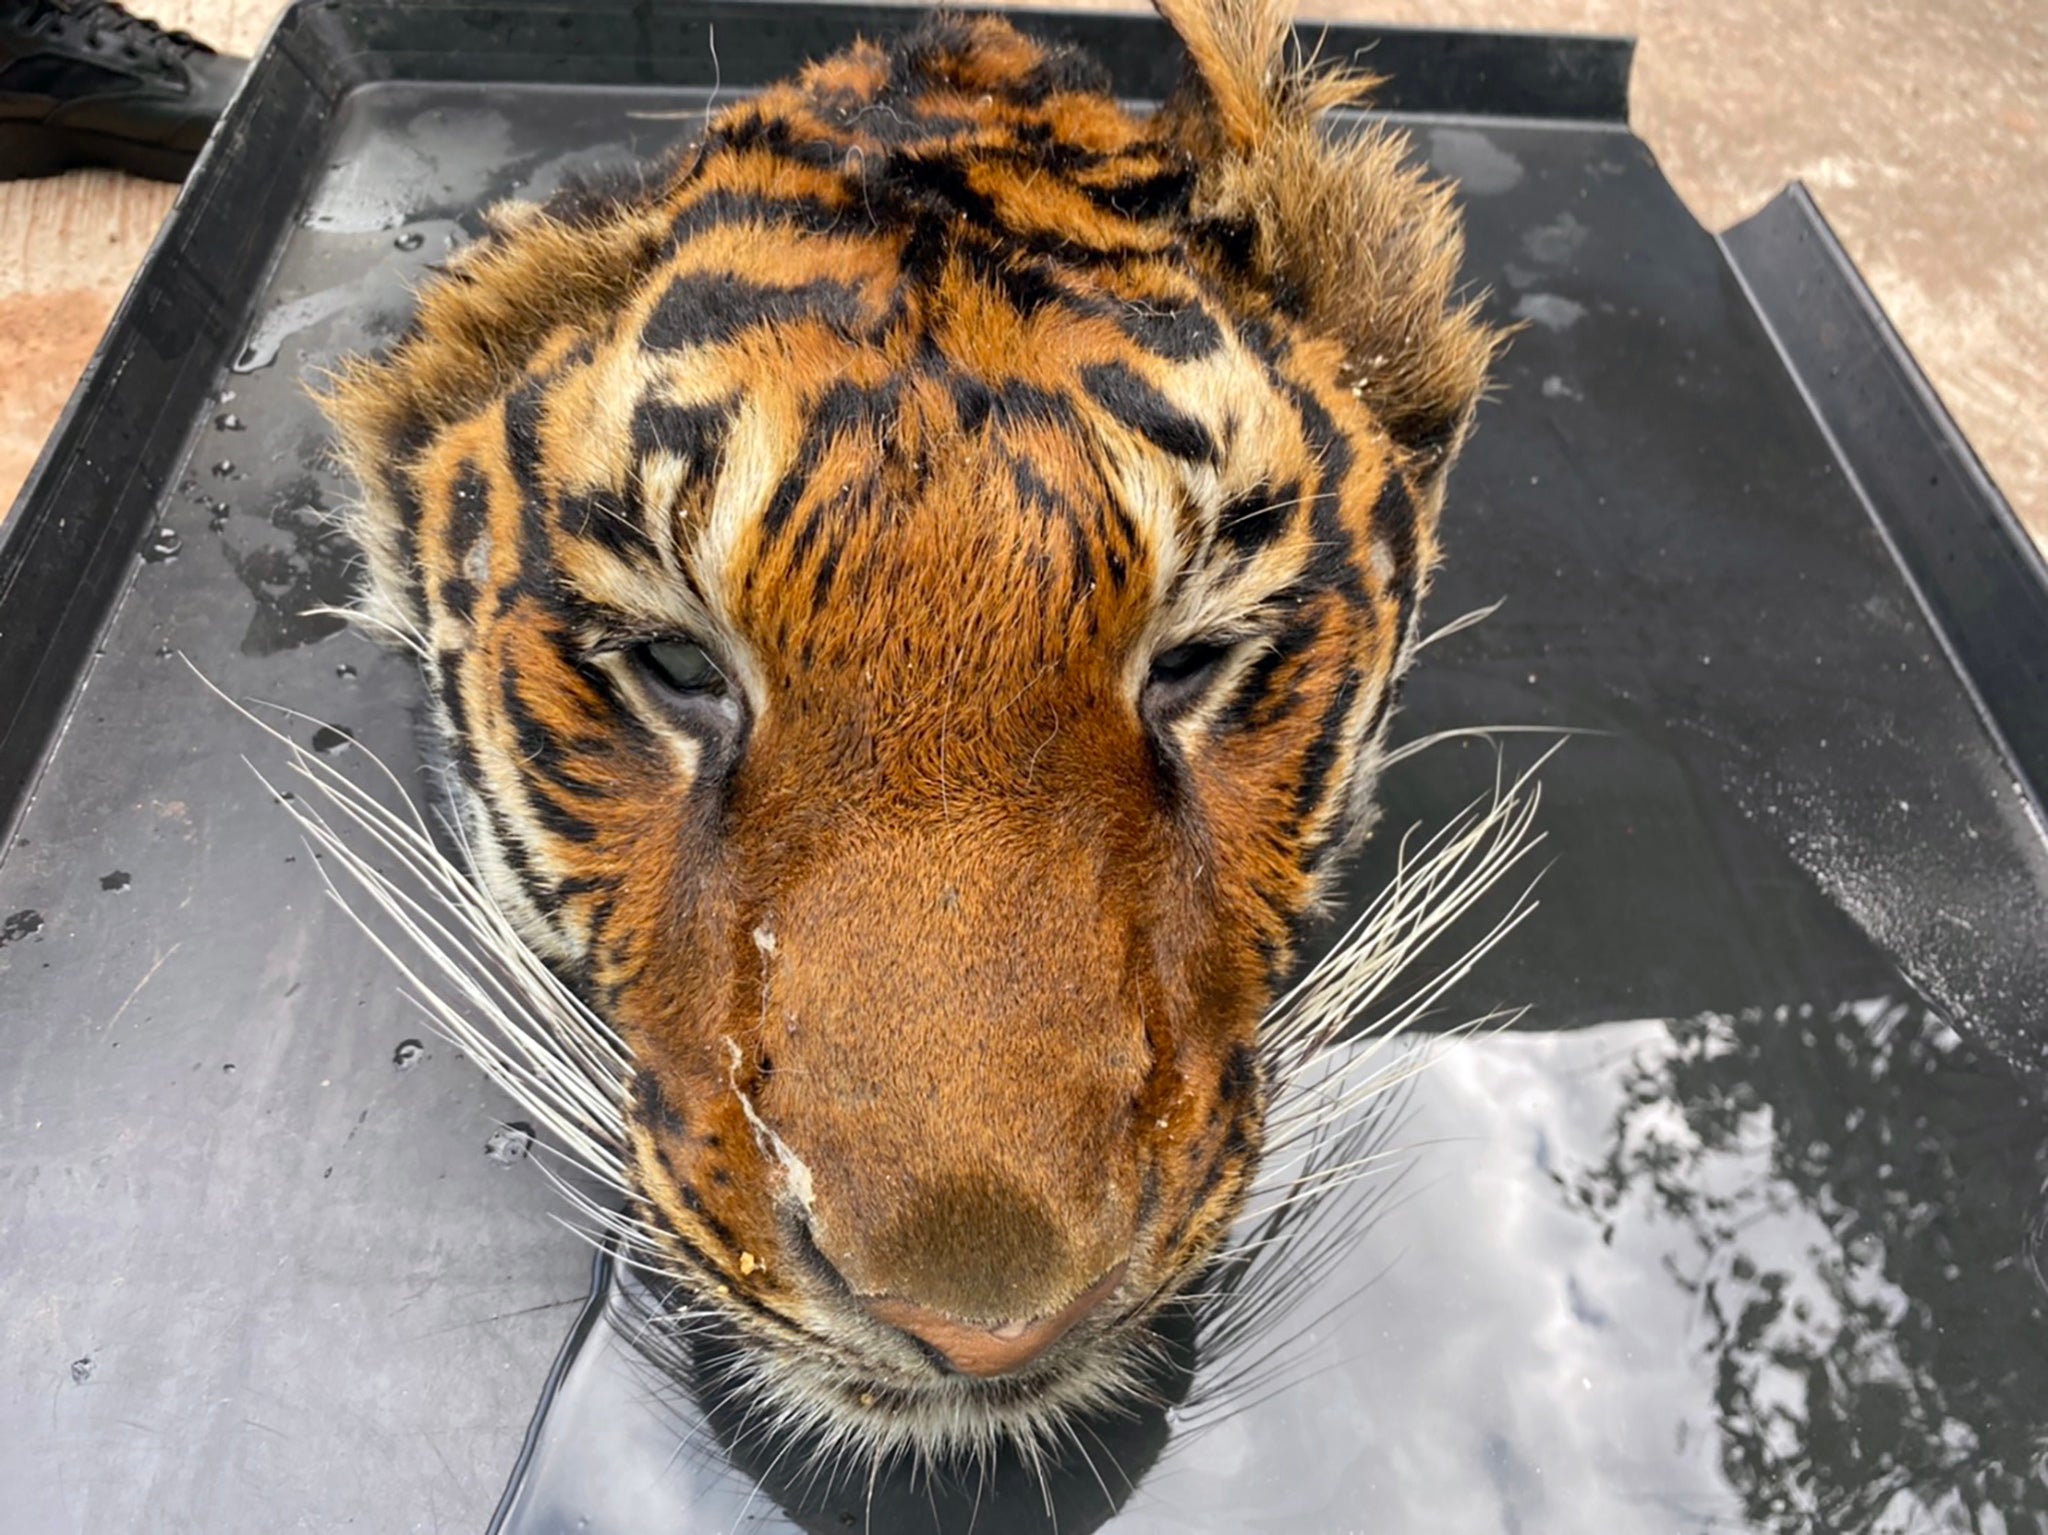 A severed head and carcass of the tiger has been discovered in the zoo.